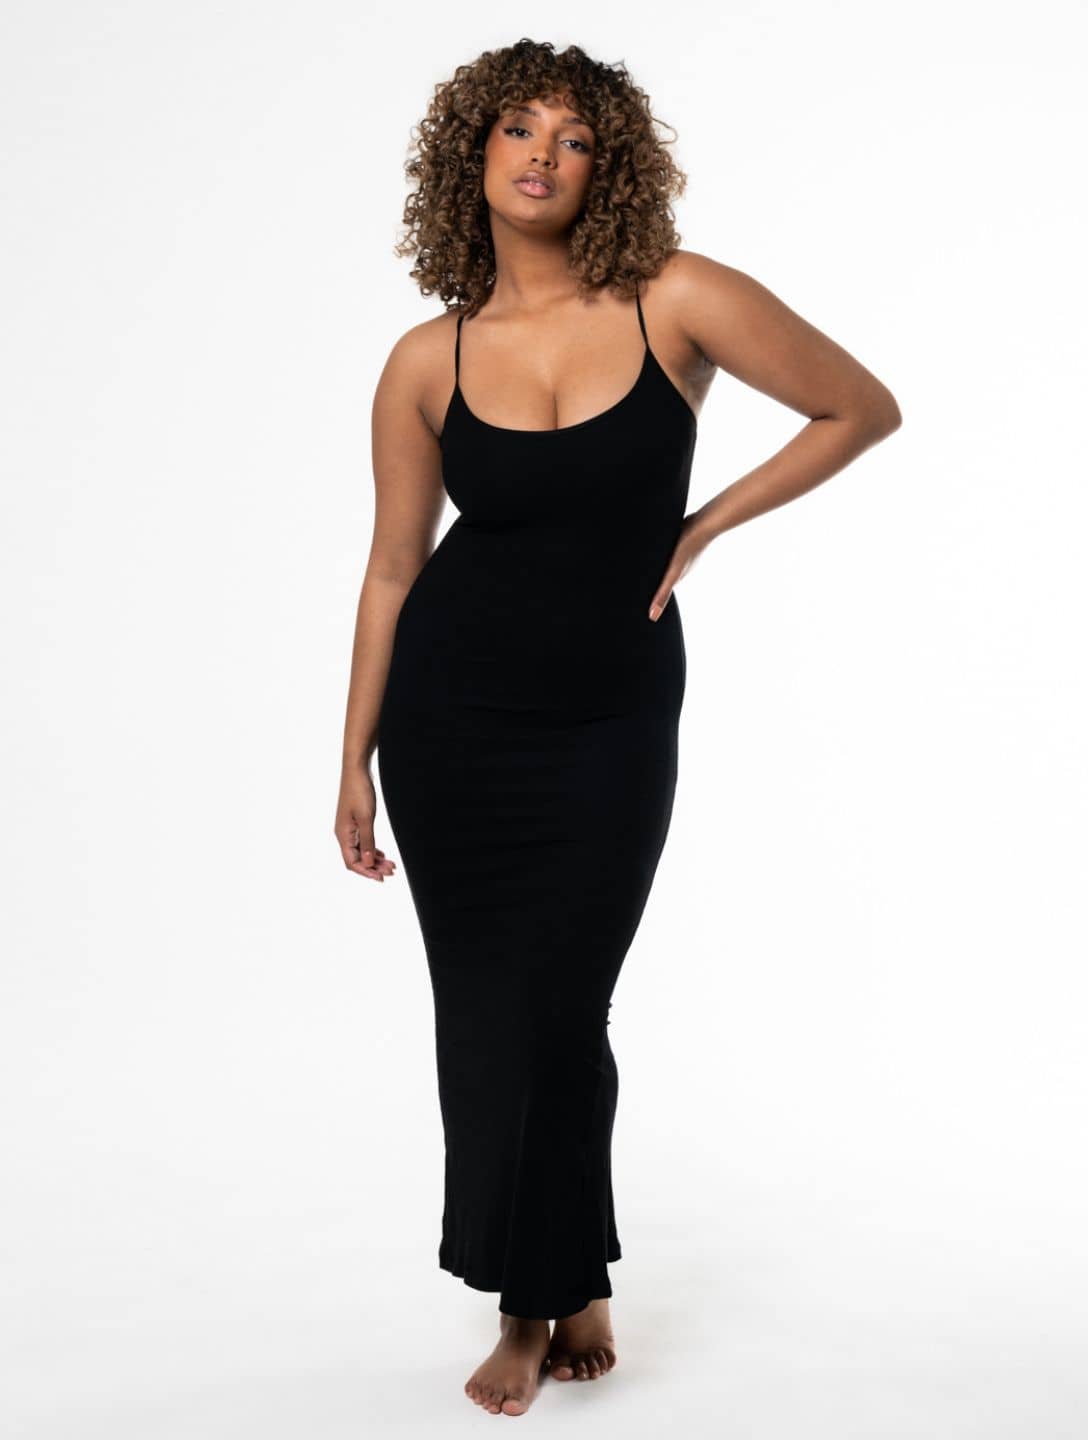 Shapewear for Maxi Dresses  Maximize Your Style and Confidence